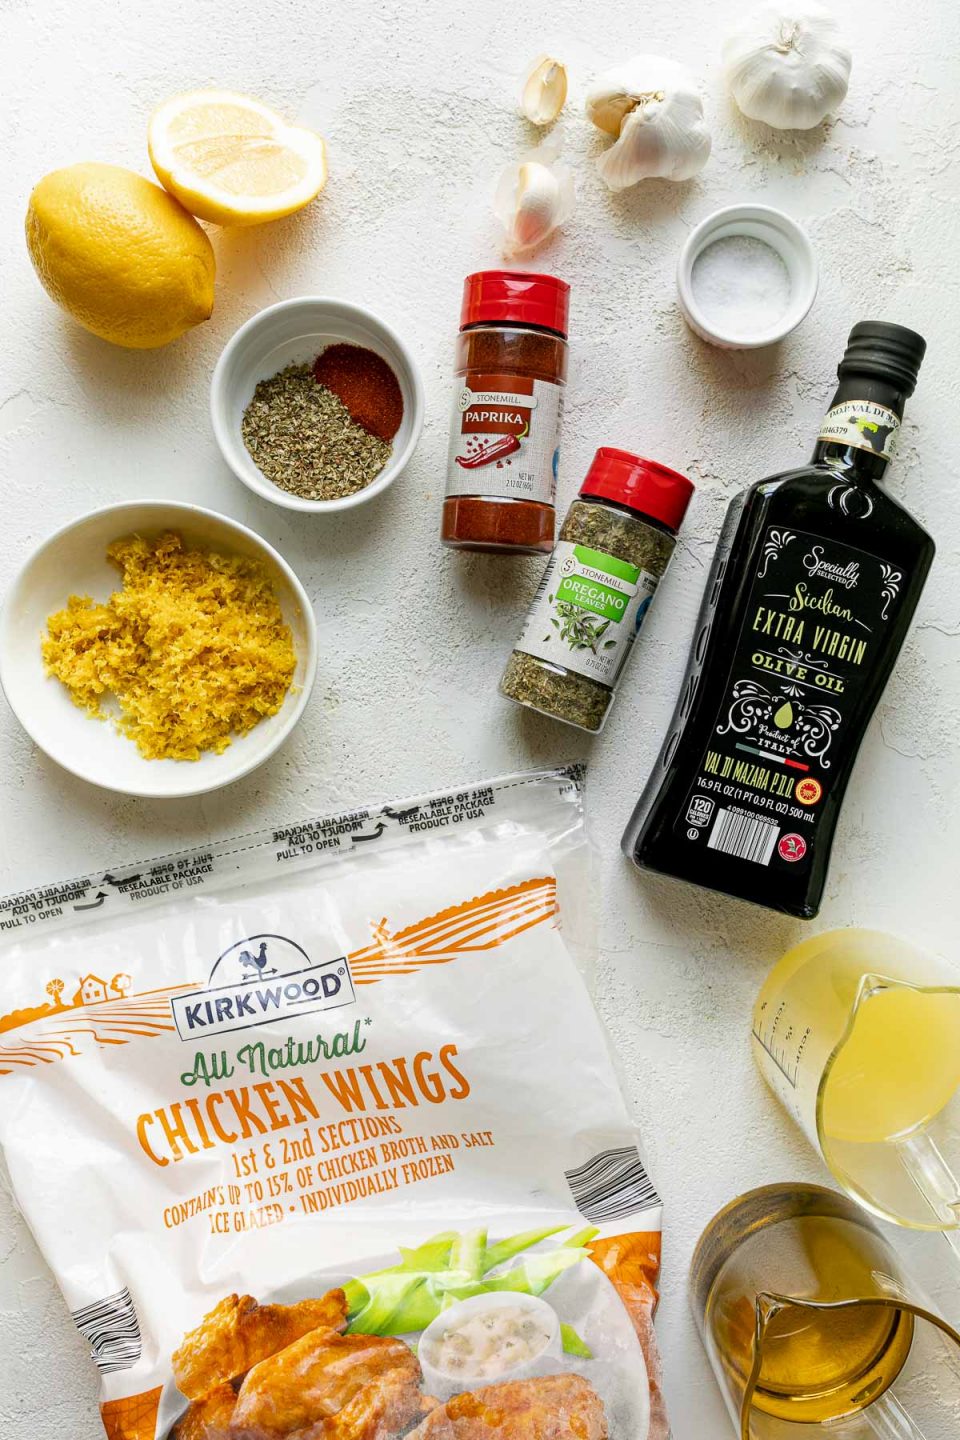 Lemony Greek Grilled Chicken Wings ingredients arranged on a white textured surface – Kirkwood All Natural Chicken Wings from ALDI, kosher salt, Specially Selected Sicilian Extra Virgin Olive Oil from ALDI, lemon zest, lemon juice, garlic, Stonemill Dried Oregano & Paprika from ALDI.